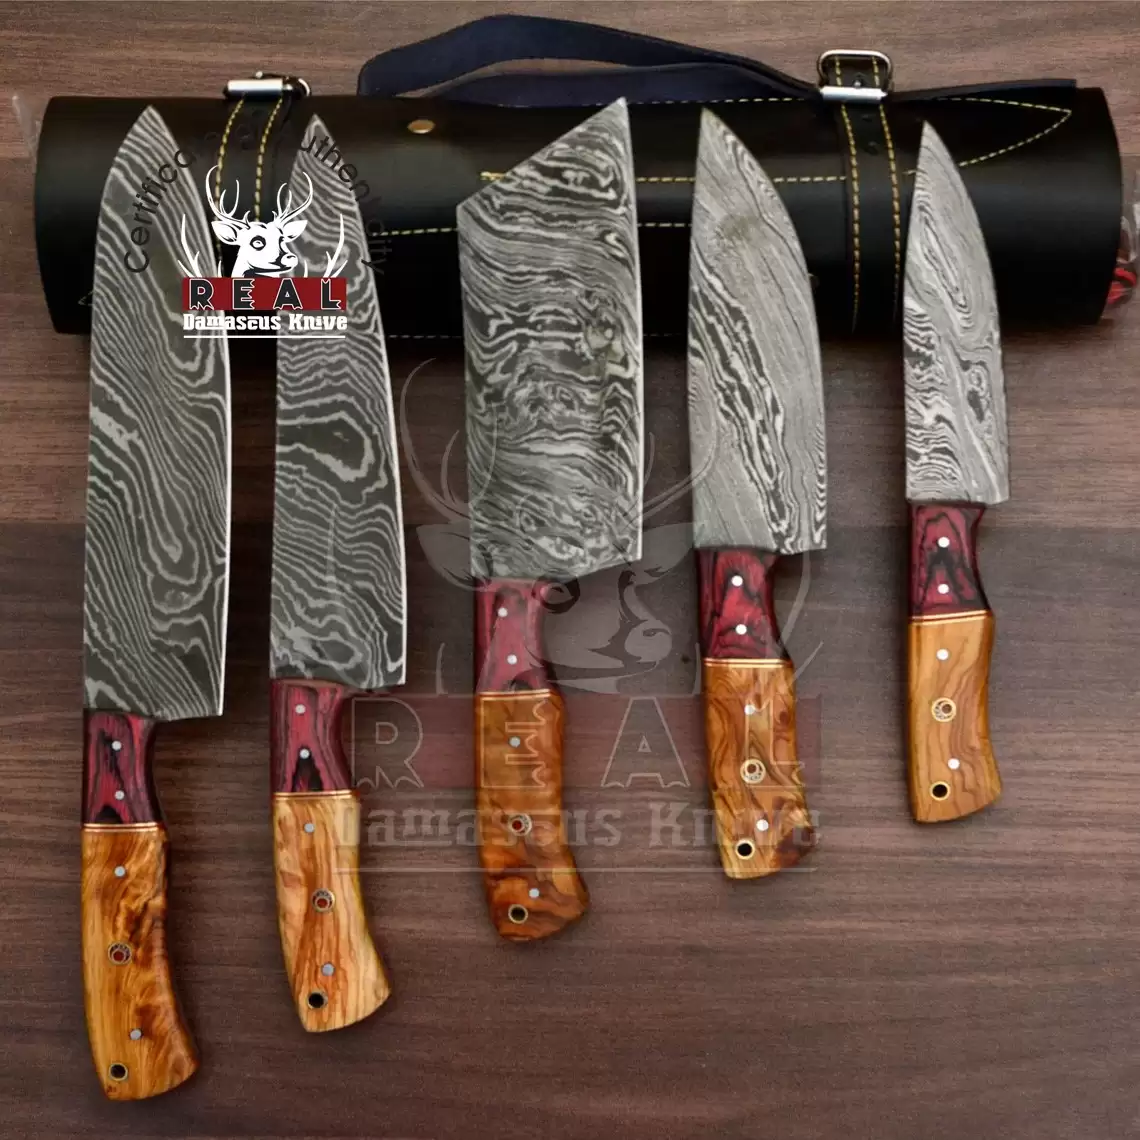 https://www.realdamascusknive.com/image/cache/cache/1001-2000/1235/main/5860-handmade-damascus-chef-set-of-5pcs-with-cover-0-1-1140x1140.webp